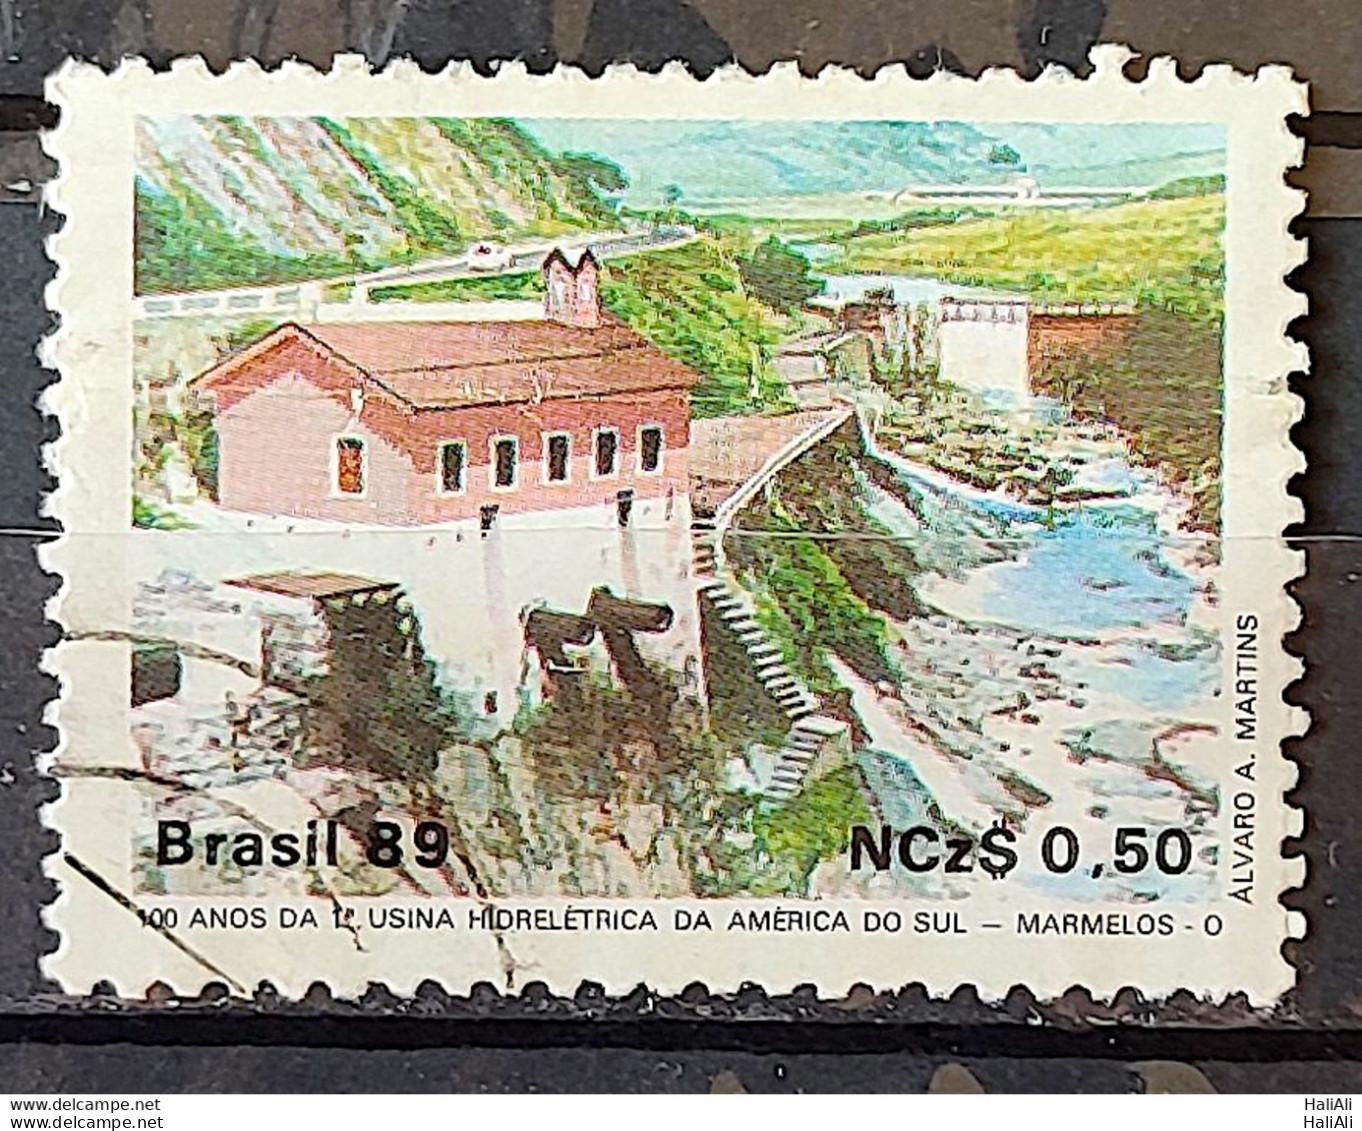 C 1644 Brazil Stamp 100 Years Hydroelectric Marmelos Energy Electricity Juiz De Fora 1989 Circulated 24 - Usati